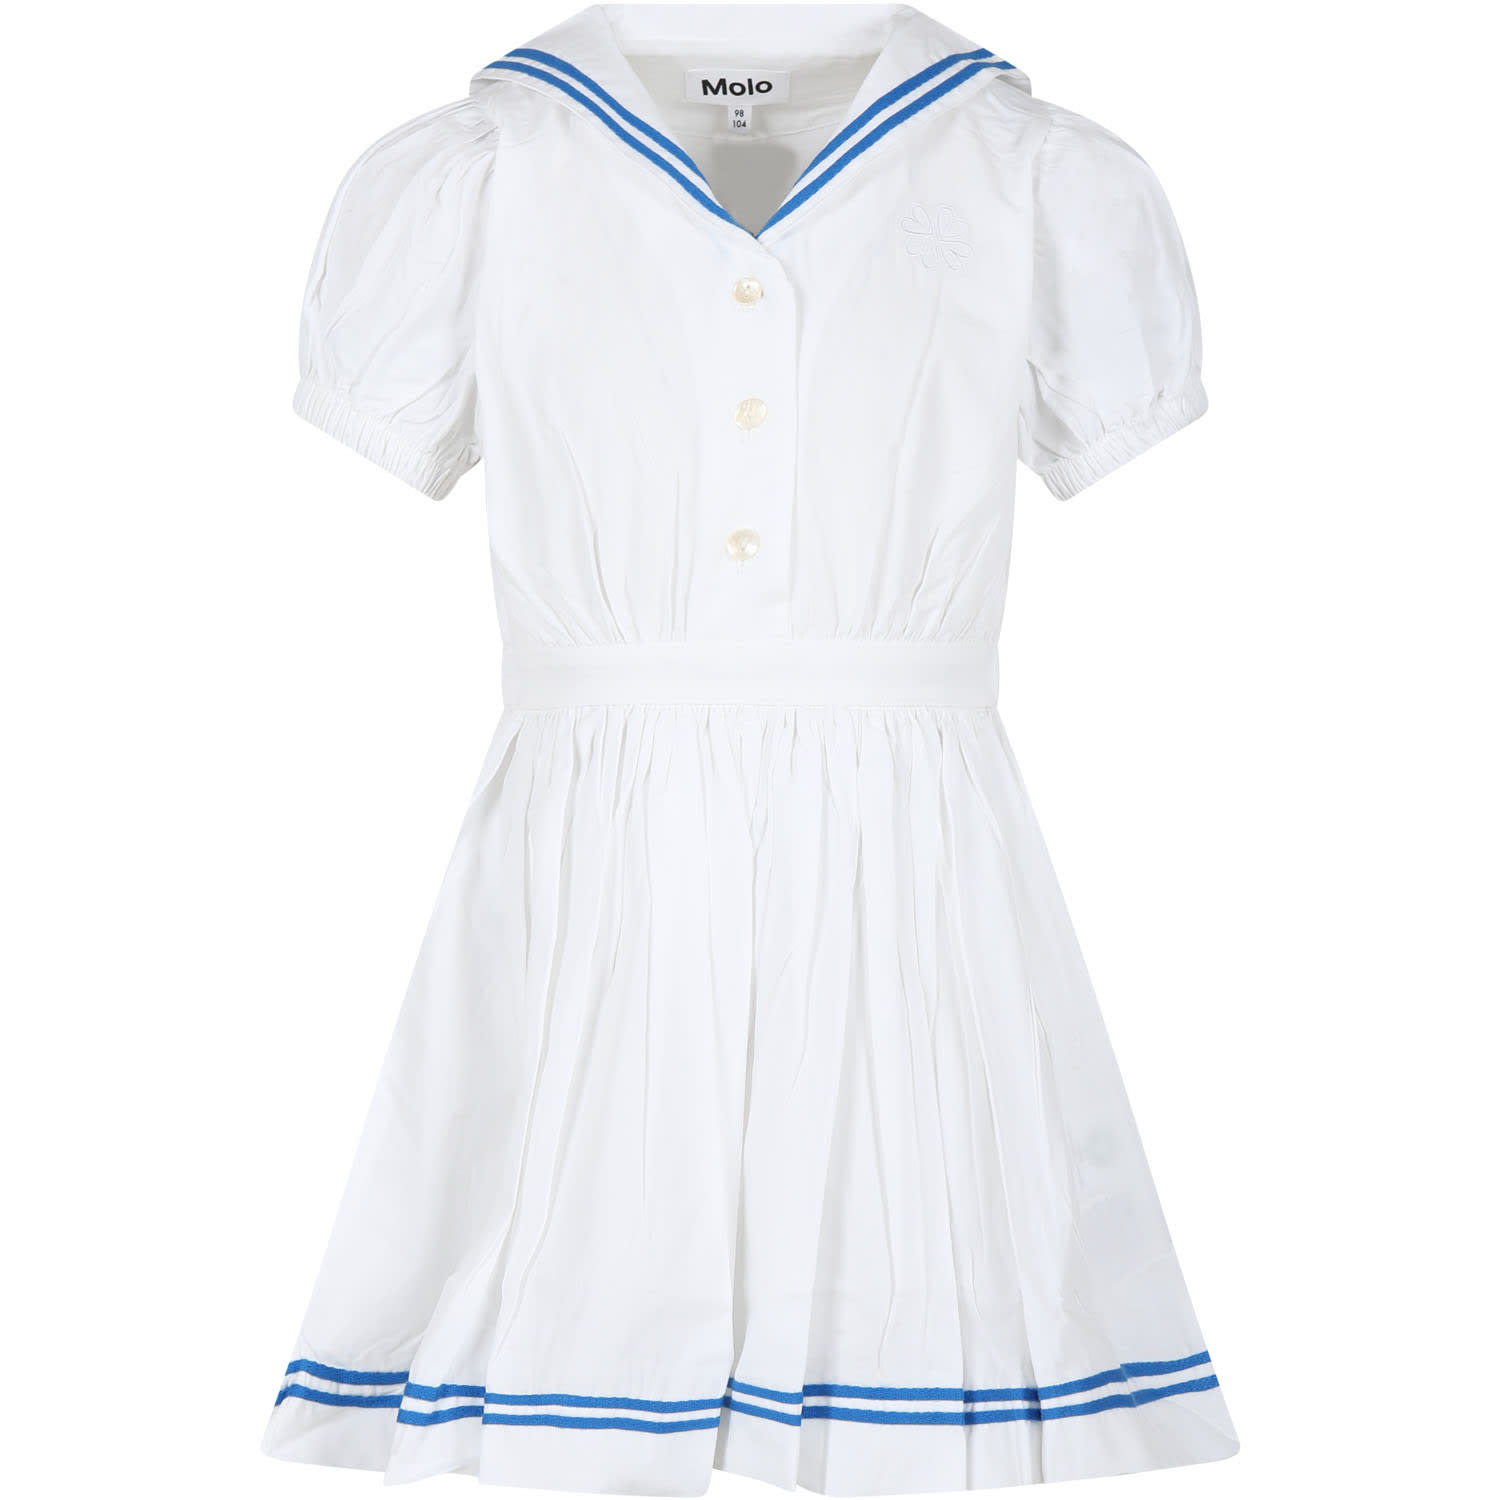 Molo Kids' White Dress For Girl With Embroidery